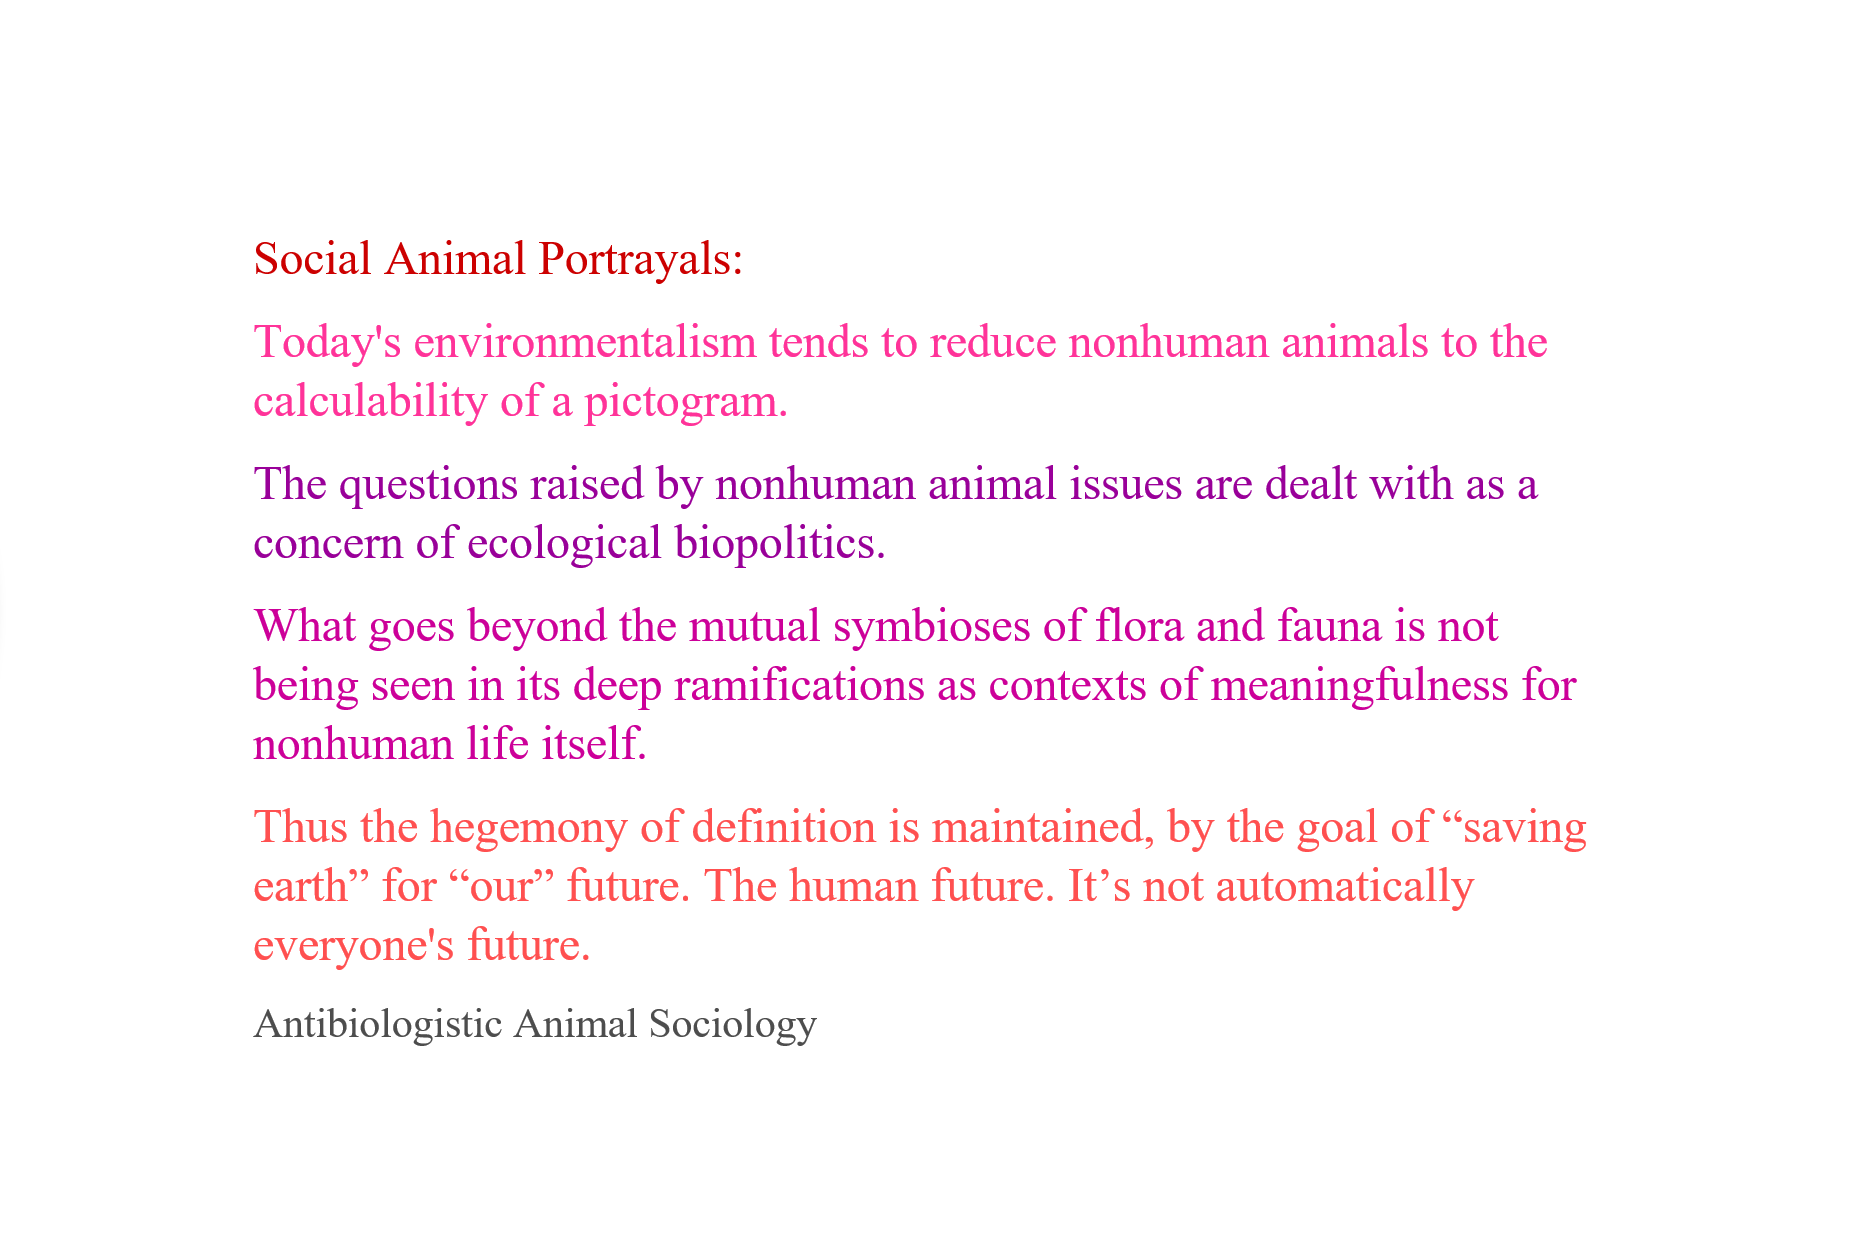 Social Animal Portrayals:
Today's environmentalism tends to reduce nonhuman animals to the calculability of a pictogram.
The questions raised by nonhuman animal issues are dealt with as a concern of ecological biopolitics.
What goes beyond the mutual symbioses of flora and fauna is not being seen in its deep ramifications as contexts of meaningfulness for nonhuman life itself.
Thus the hegemony of definition is maintained, by the goal of “saving earth” for “our” future. The human future. It’s not automatically everyone's future.
Antibiologistic Animal Sociology